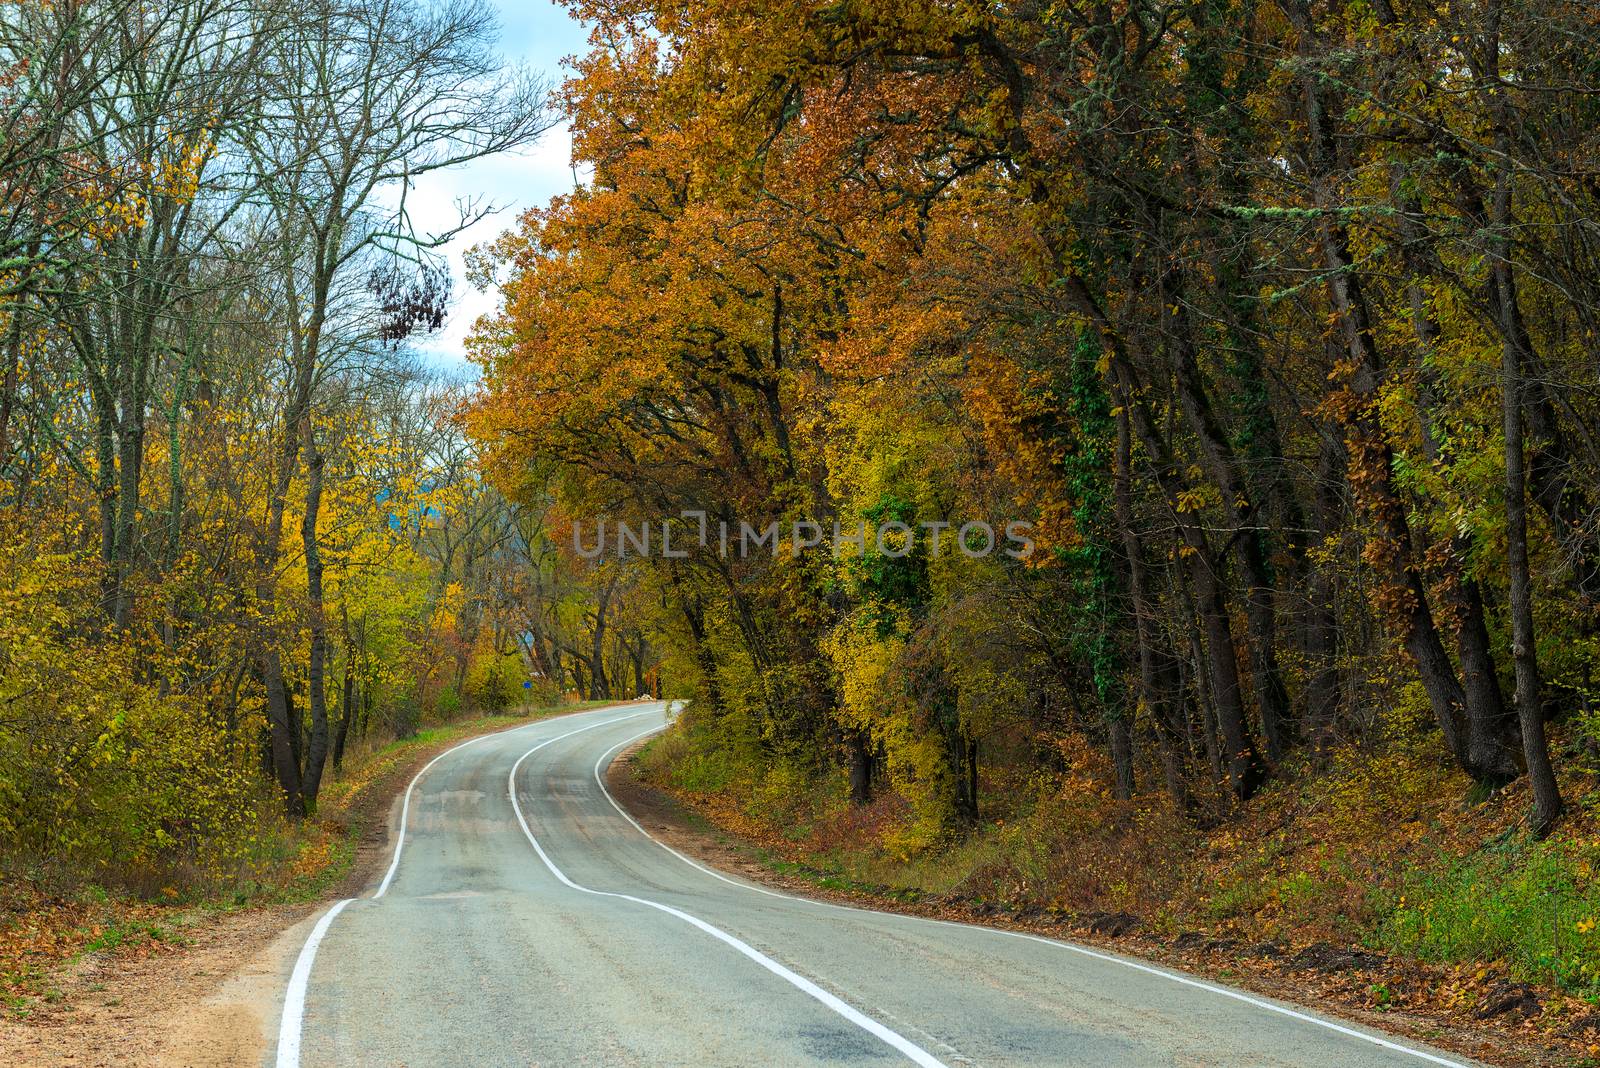 Car winding road in the mountains on an autumn afternoon